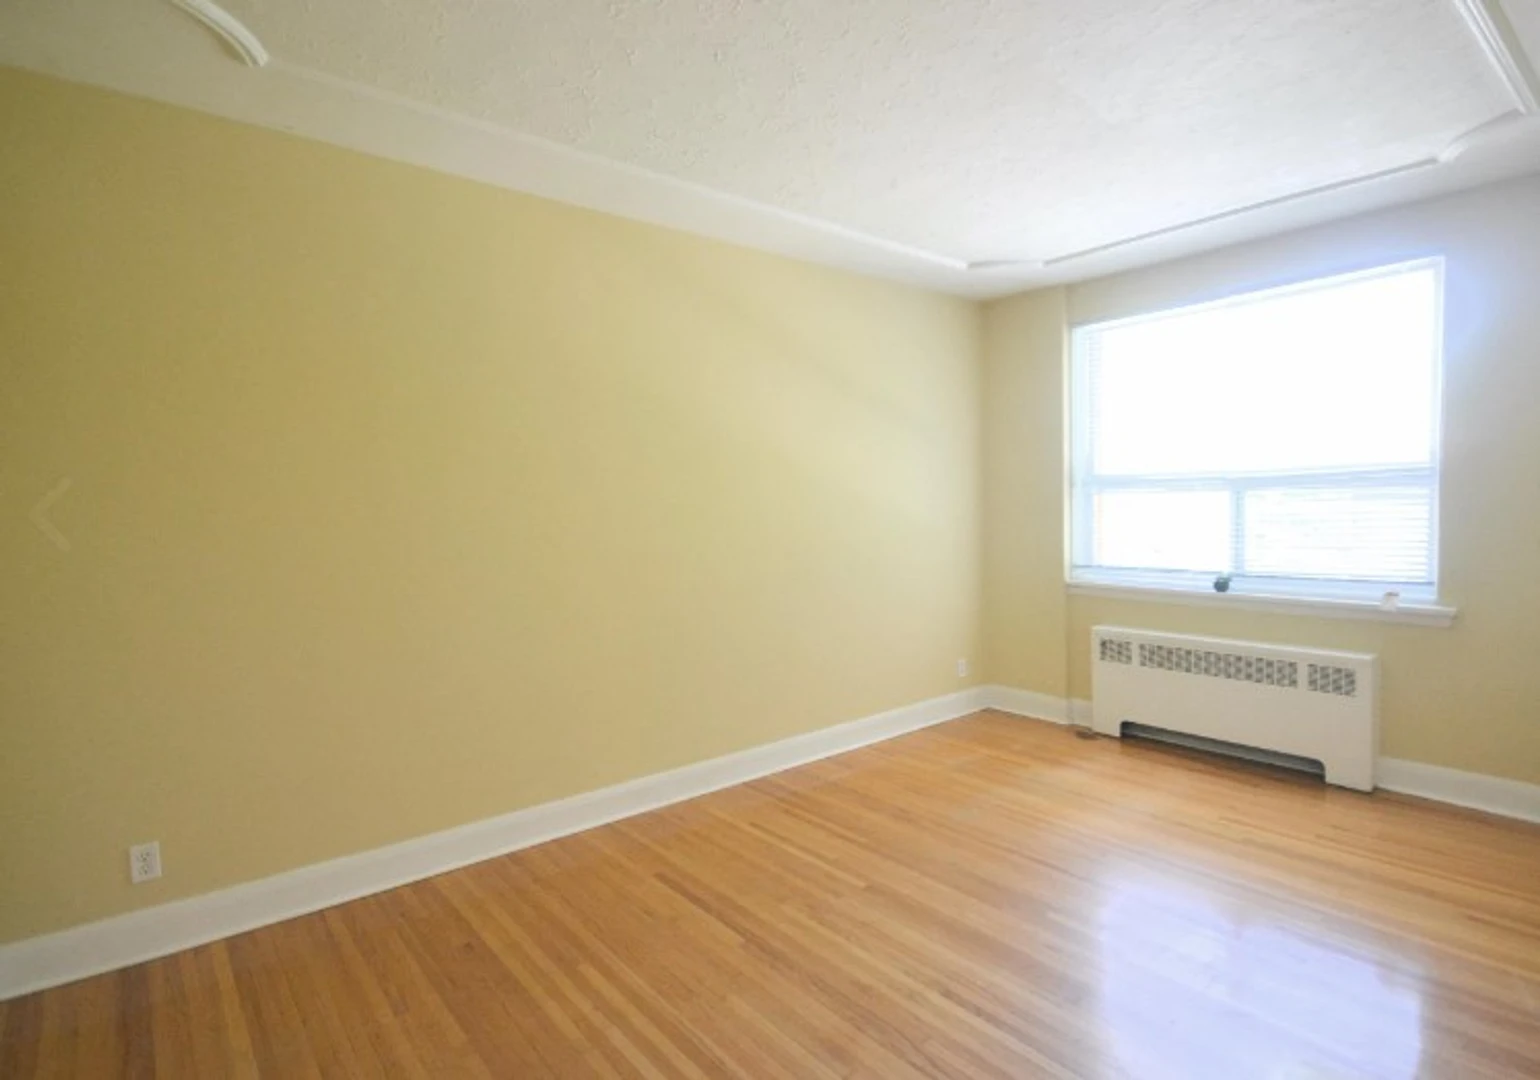 Accommodation with 3 bedrooms in winnipeg